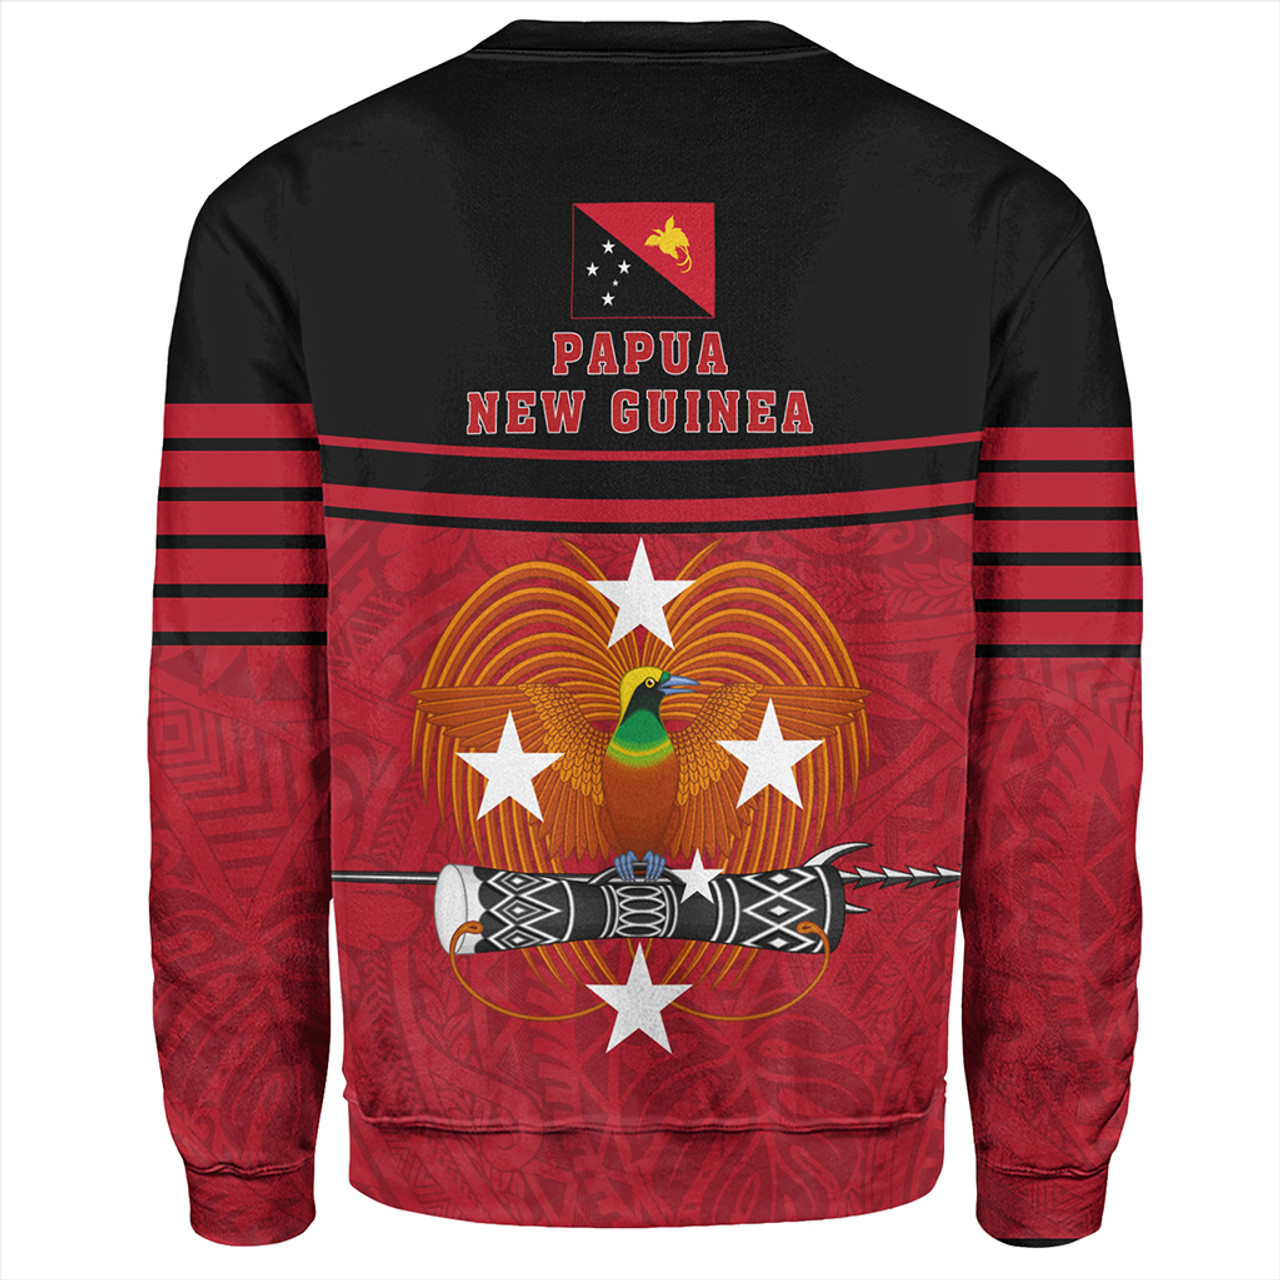 Papua New Guinea Sweatshirt Our Land Our People Our Culture